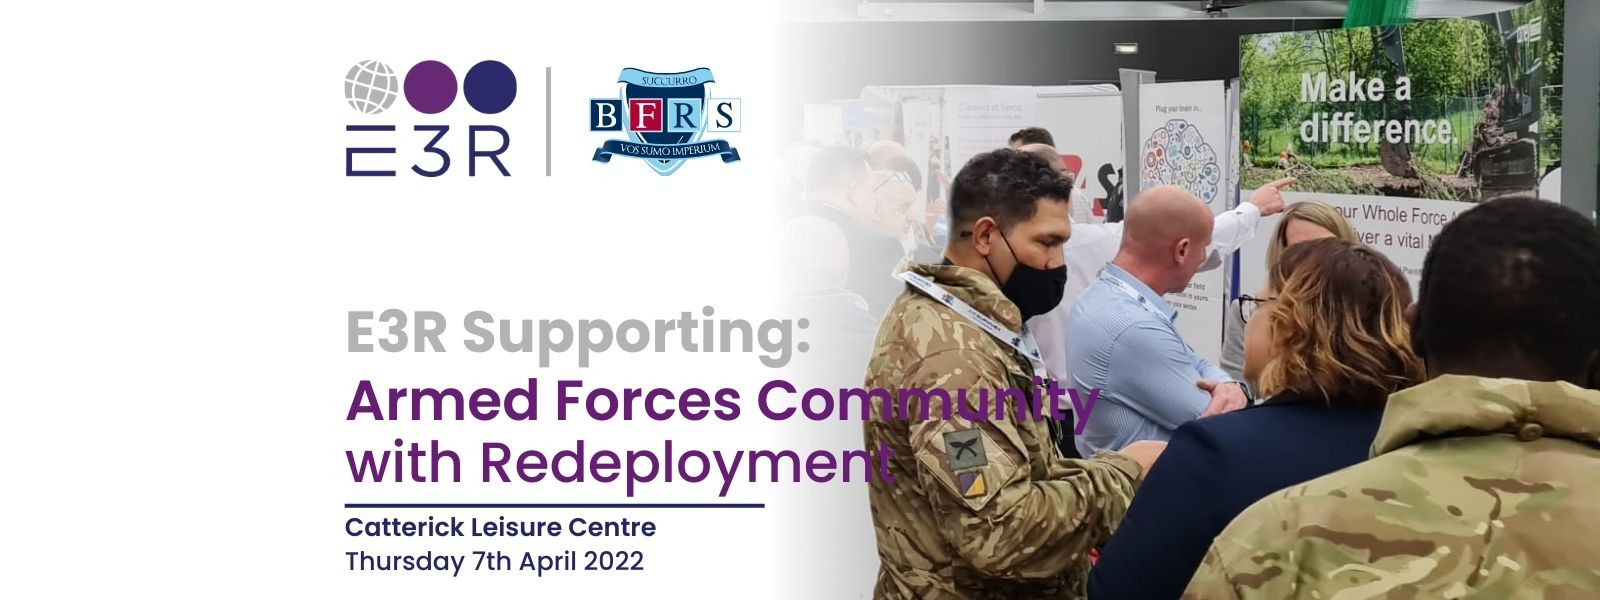 Armed Forces Community Supported with Redeployment...